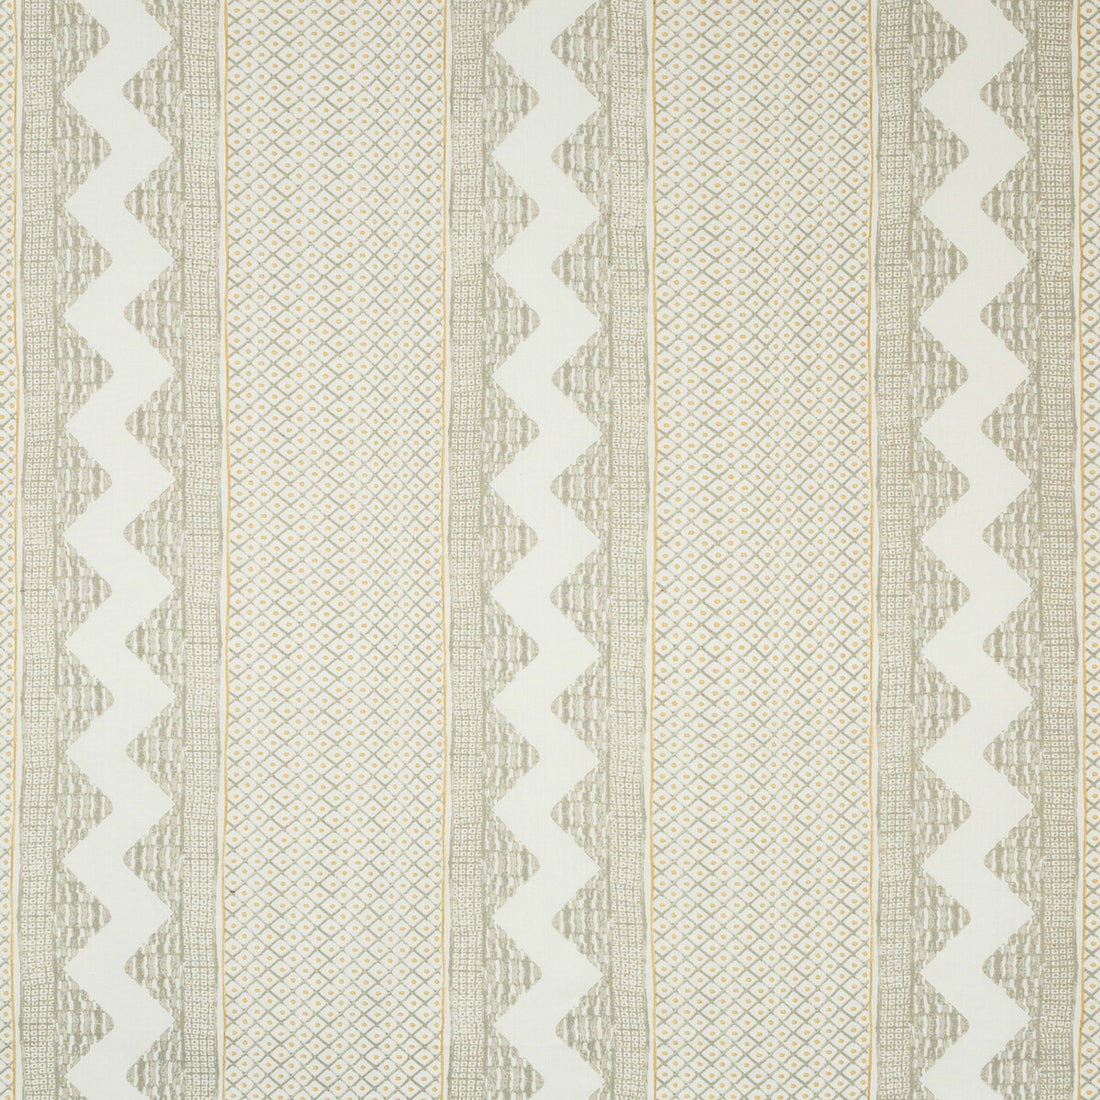 Whitaker Print fabric in grey/sand color - pattern 2020188.1611.0 - by Lee Jofa in the Avondale collection